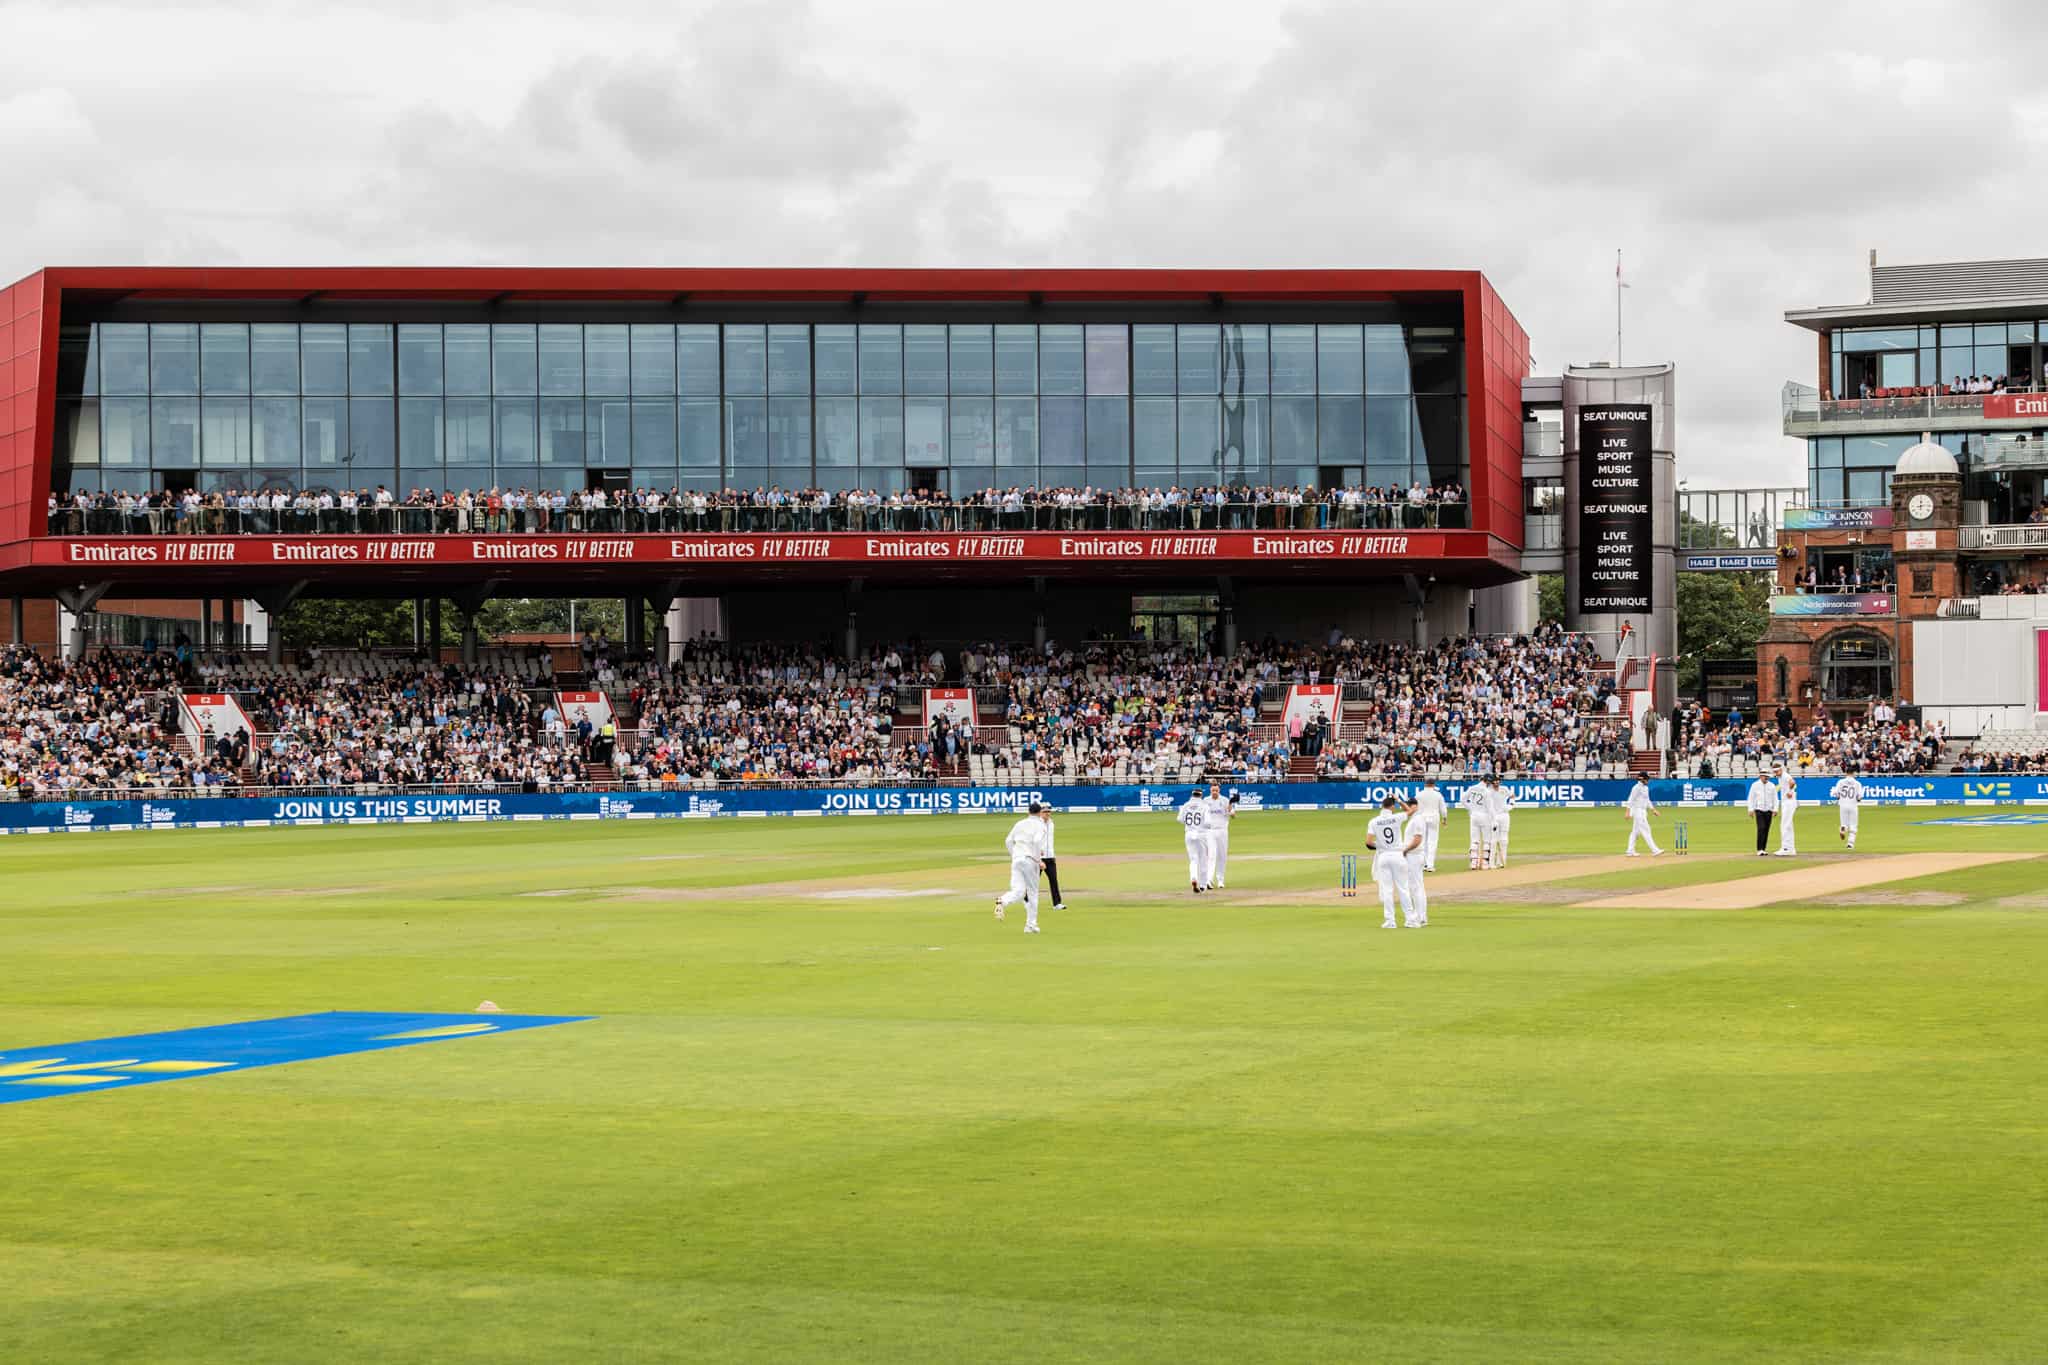 England's Test Cricket team play at Emirates Old Trafford